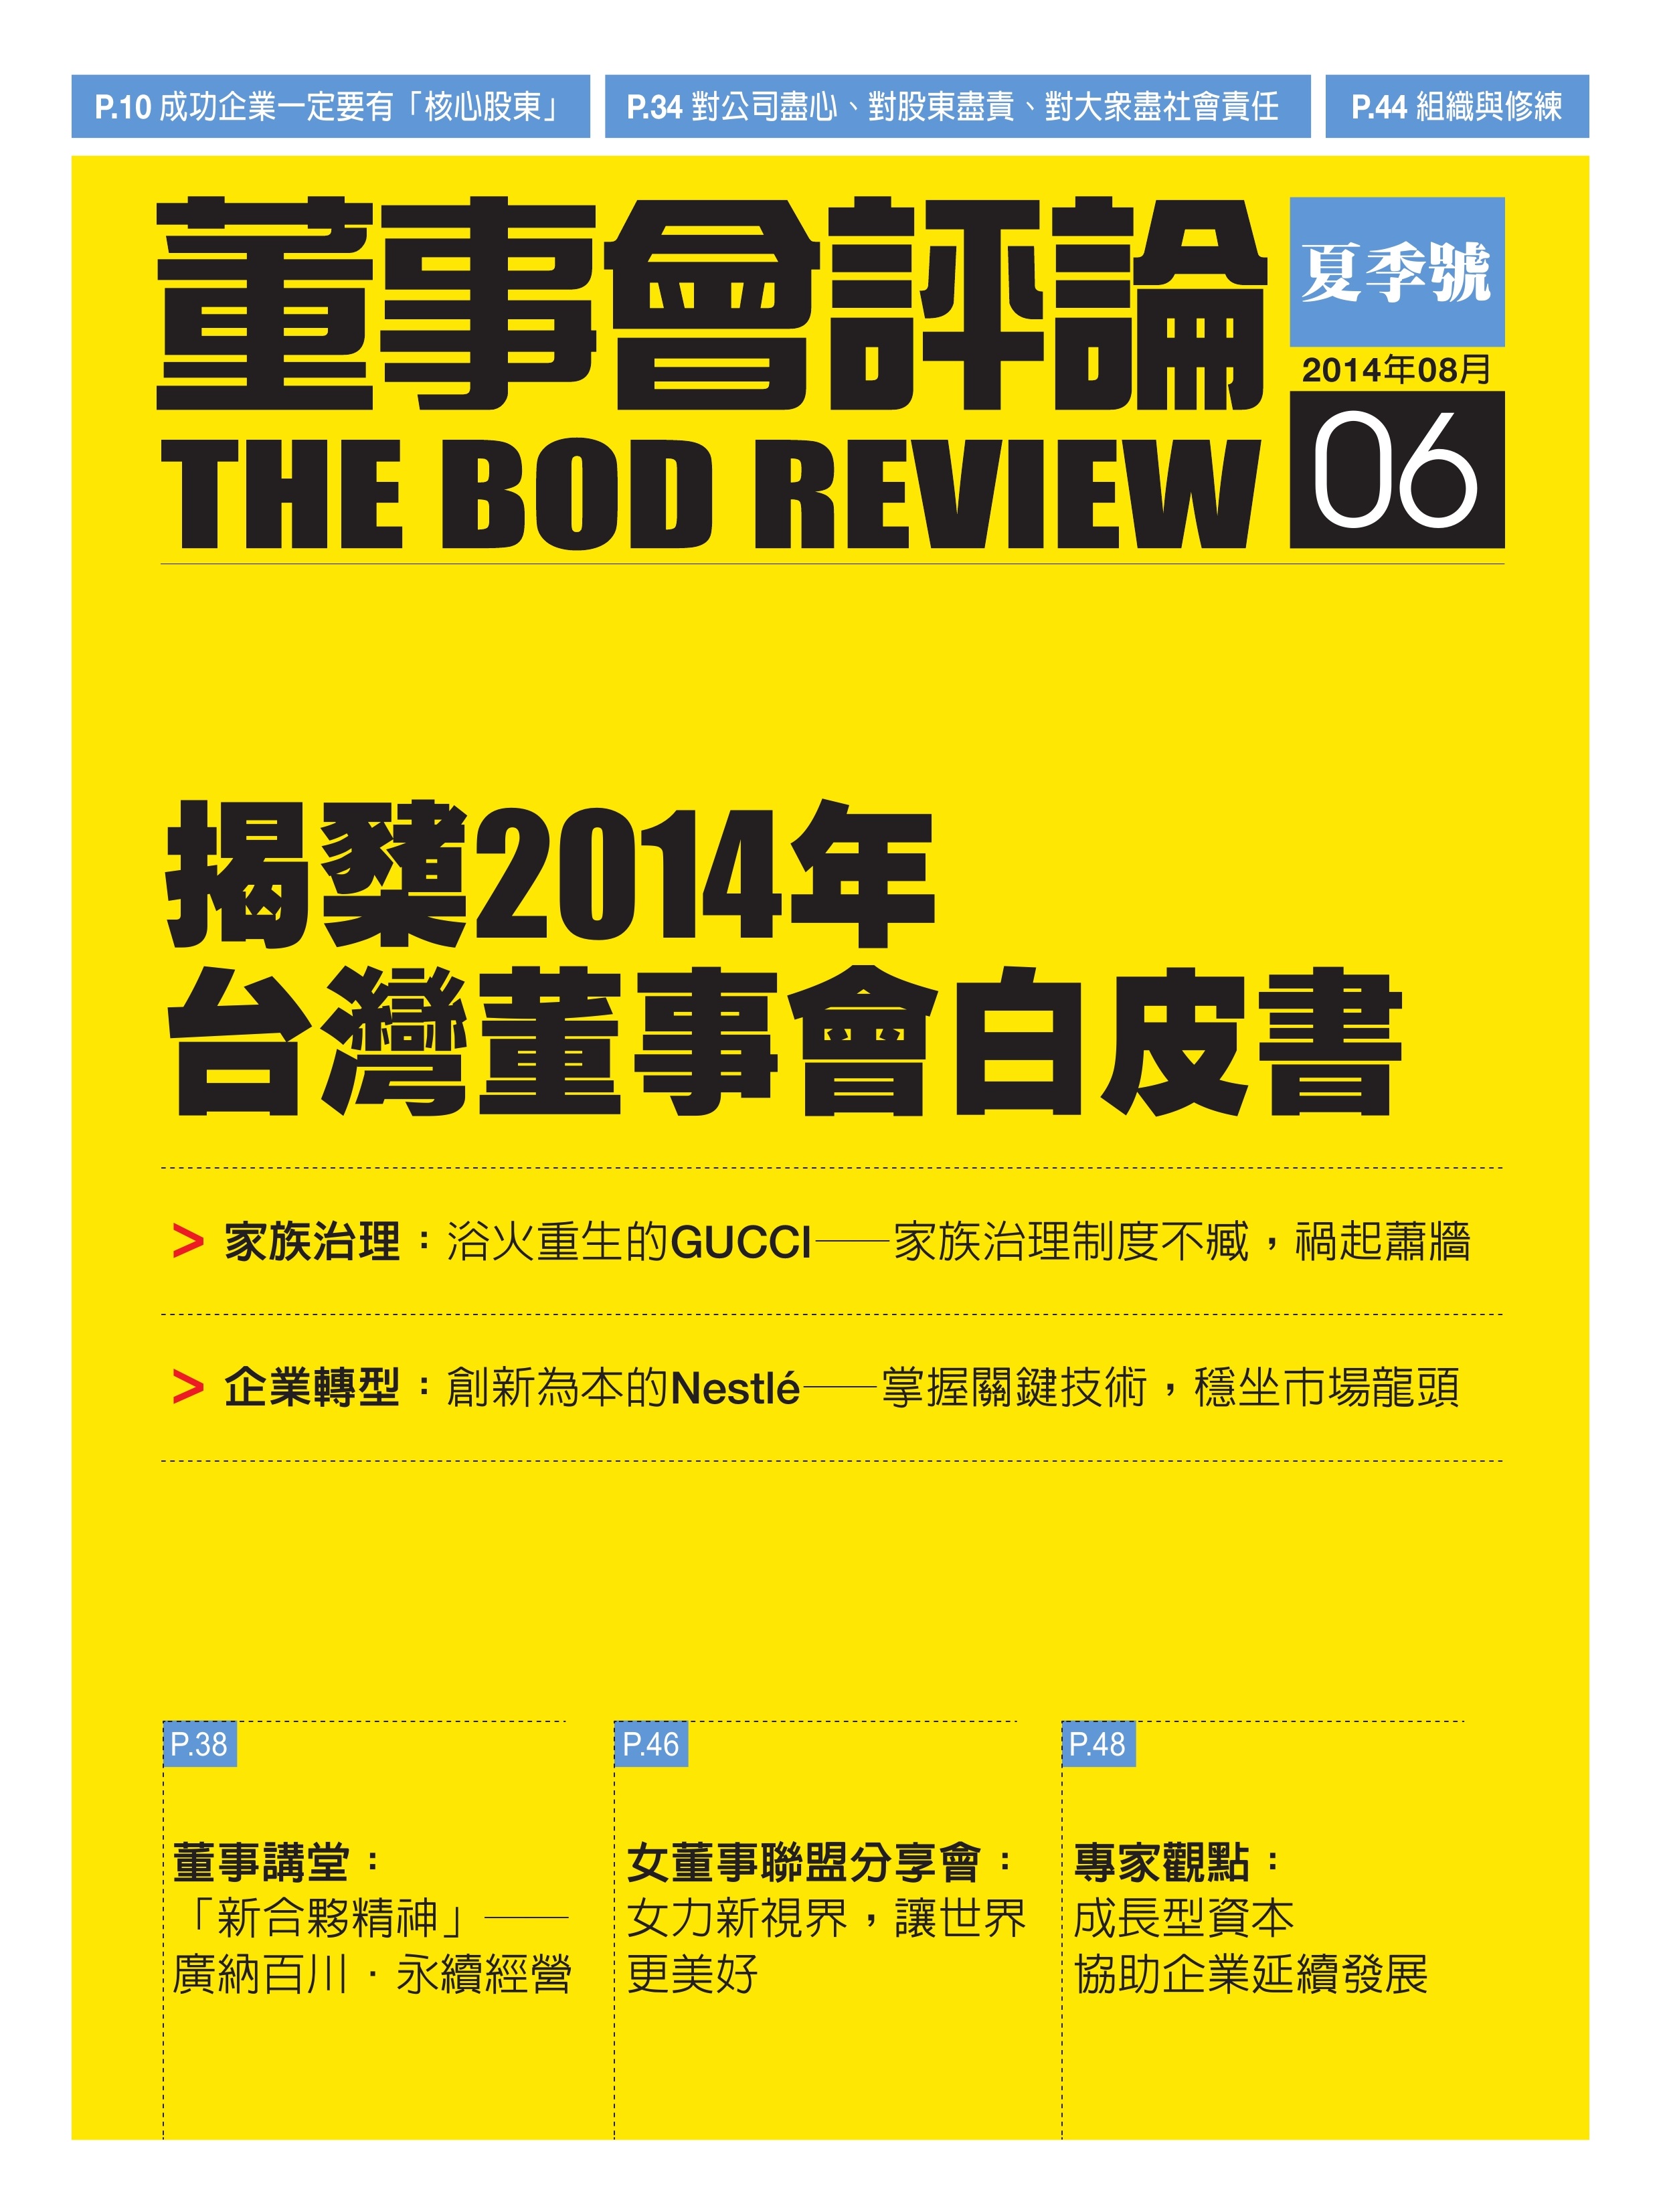 BOD Review NO.6 cover.jpg